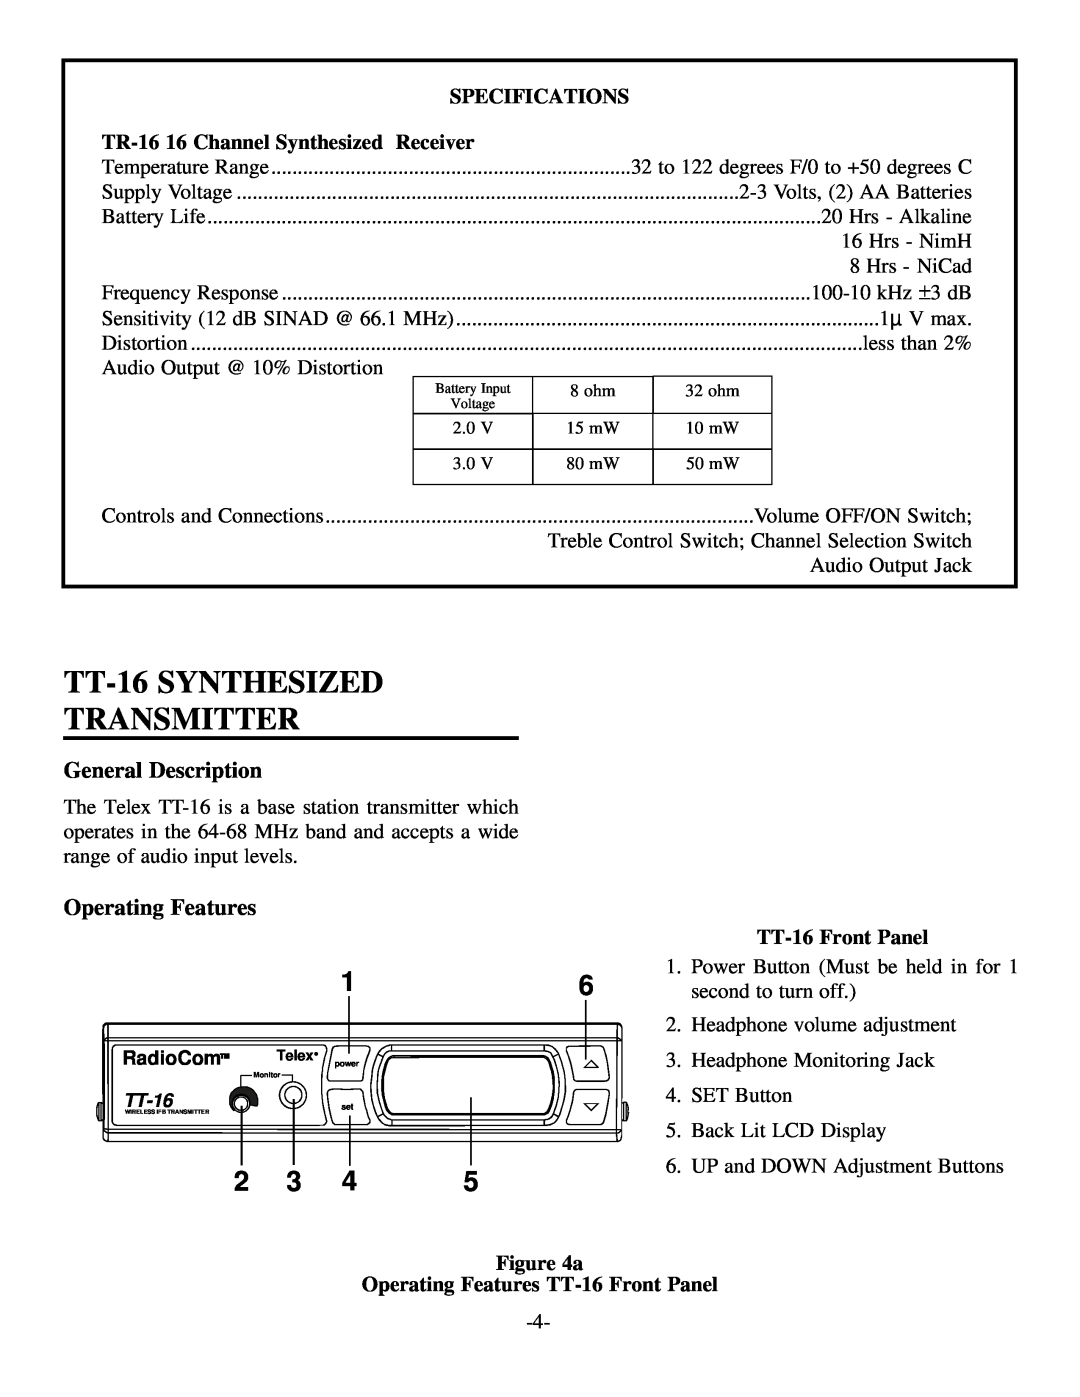 Telex manual Specifications, TR-1616 Channel Synthesized Receiver, TT-16Front Panel, UP and DOWN Adjustment Buttons 